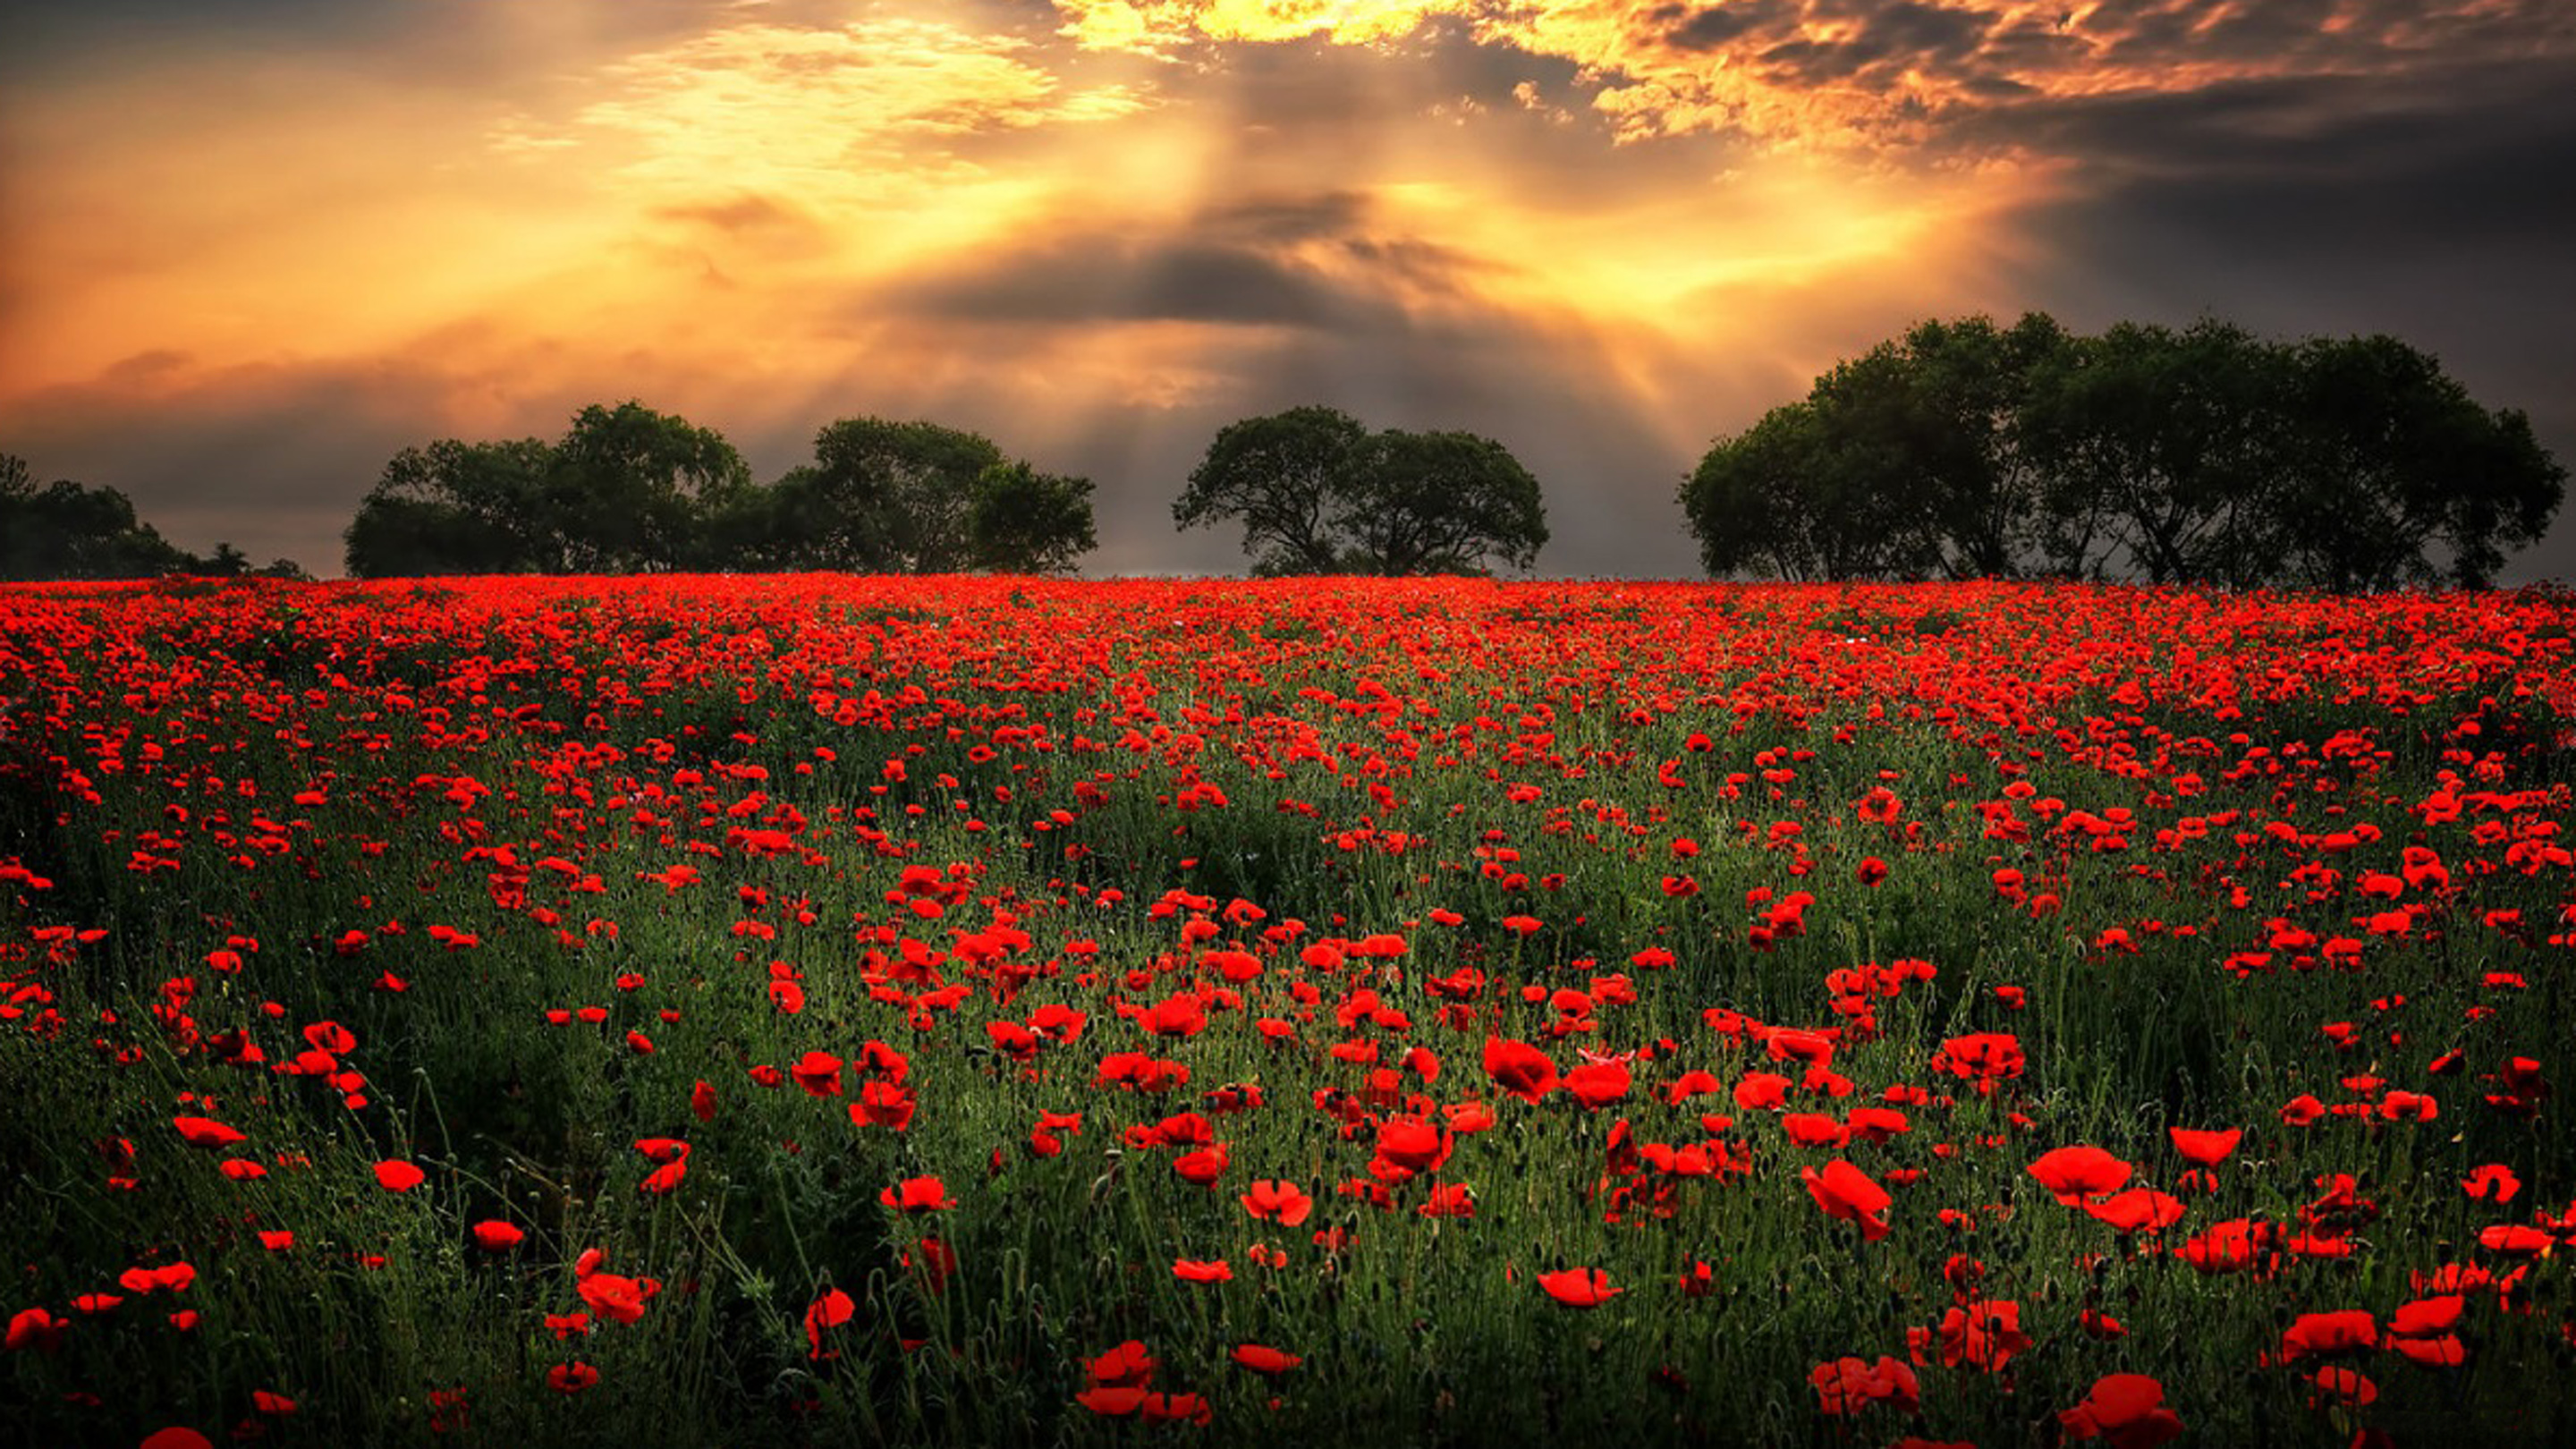 Amazing Sky over Poppy Field HD Wallpaper. Background Image